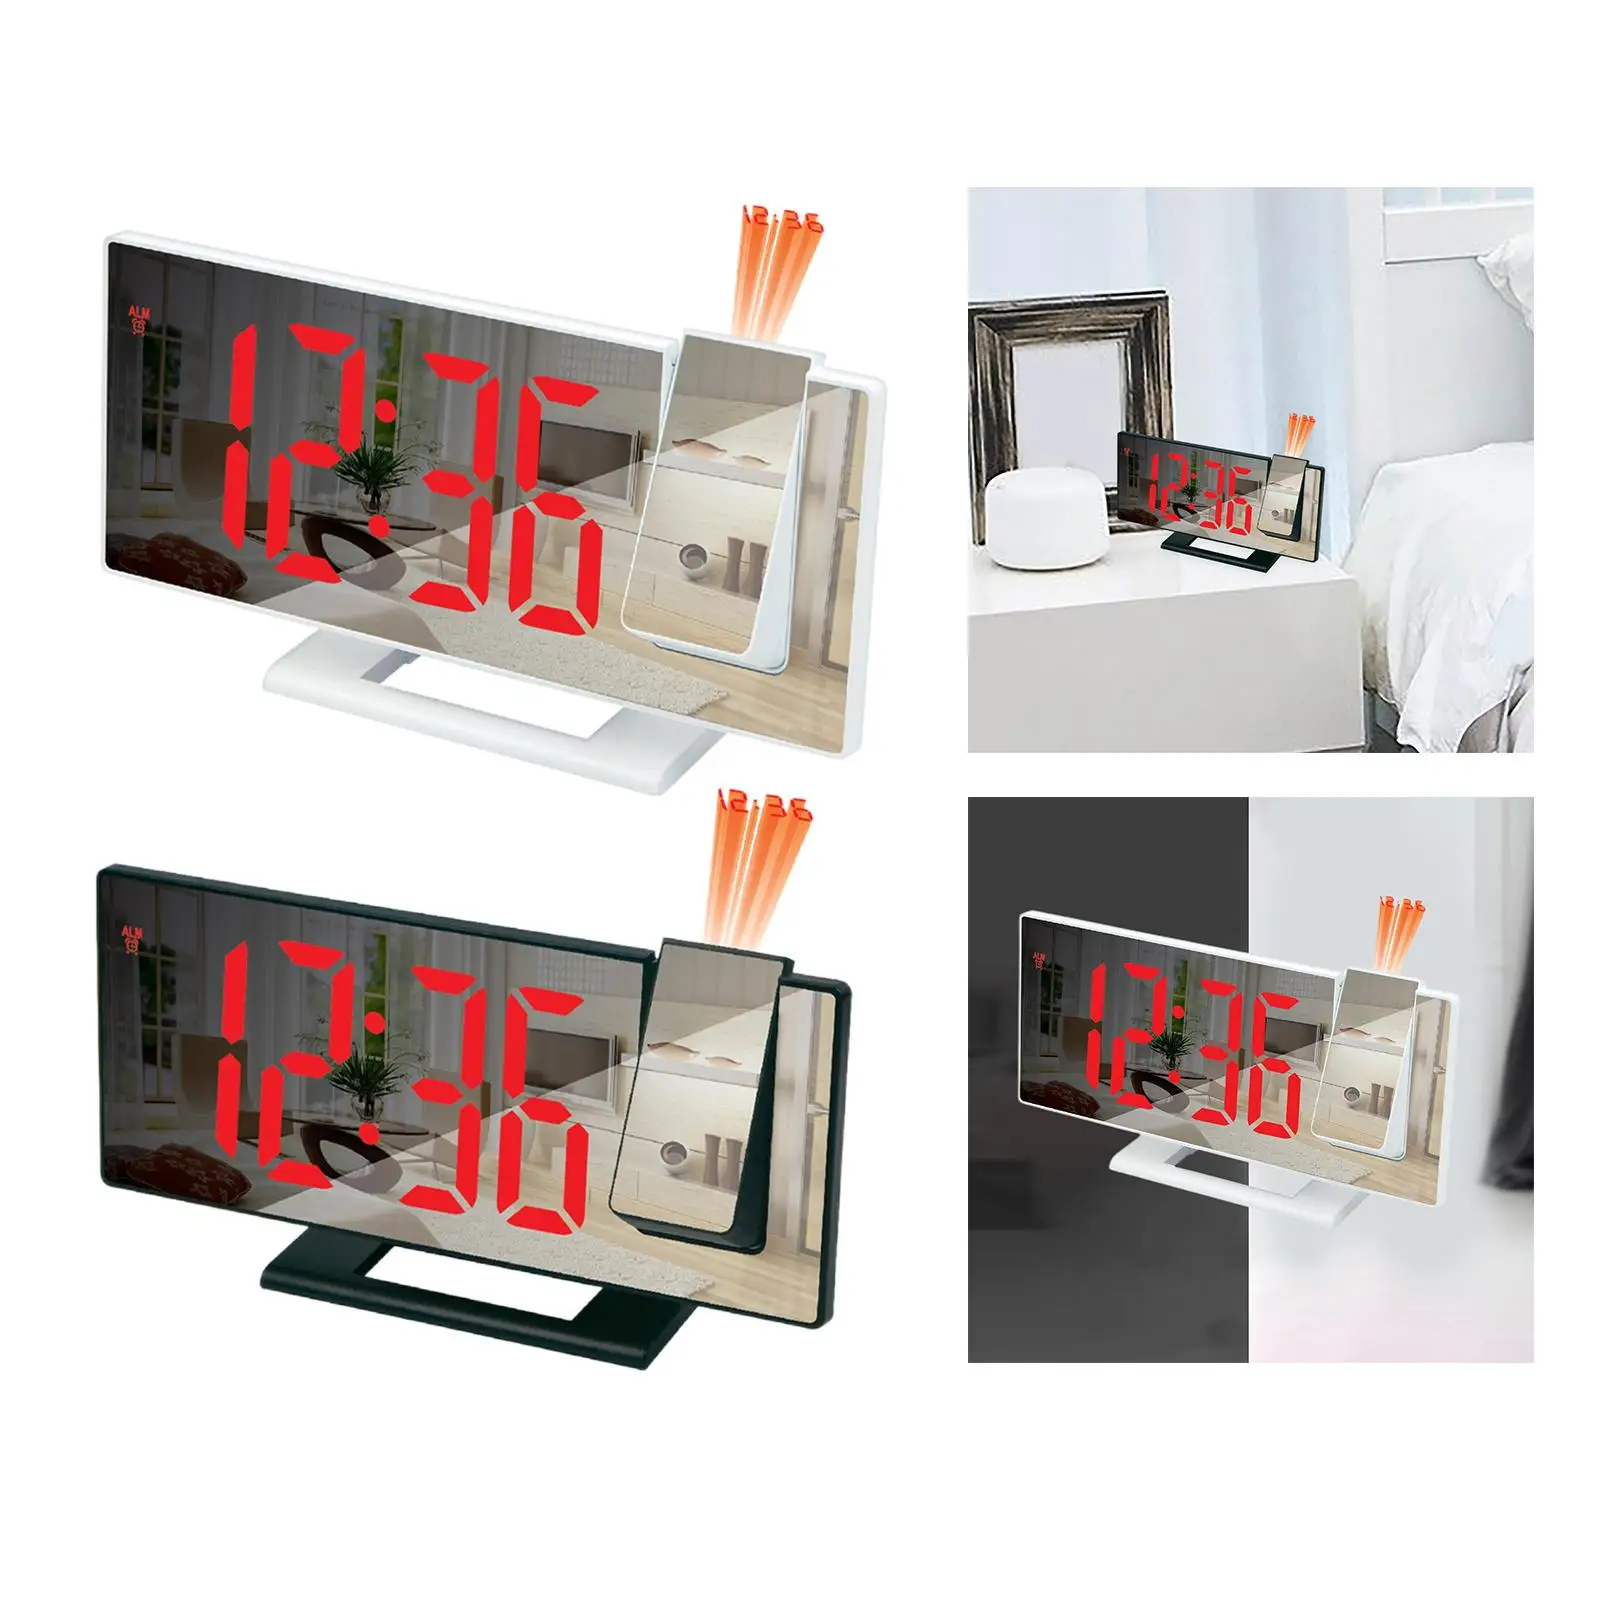 Projection Digital Alarm Clock Wall Ceiling Clock 12/24H Red Fonts USB Powered LED Alarm Clock for Kids Students Elderly Office